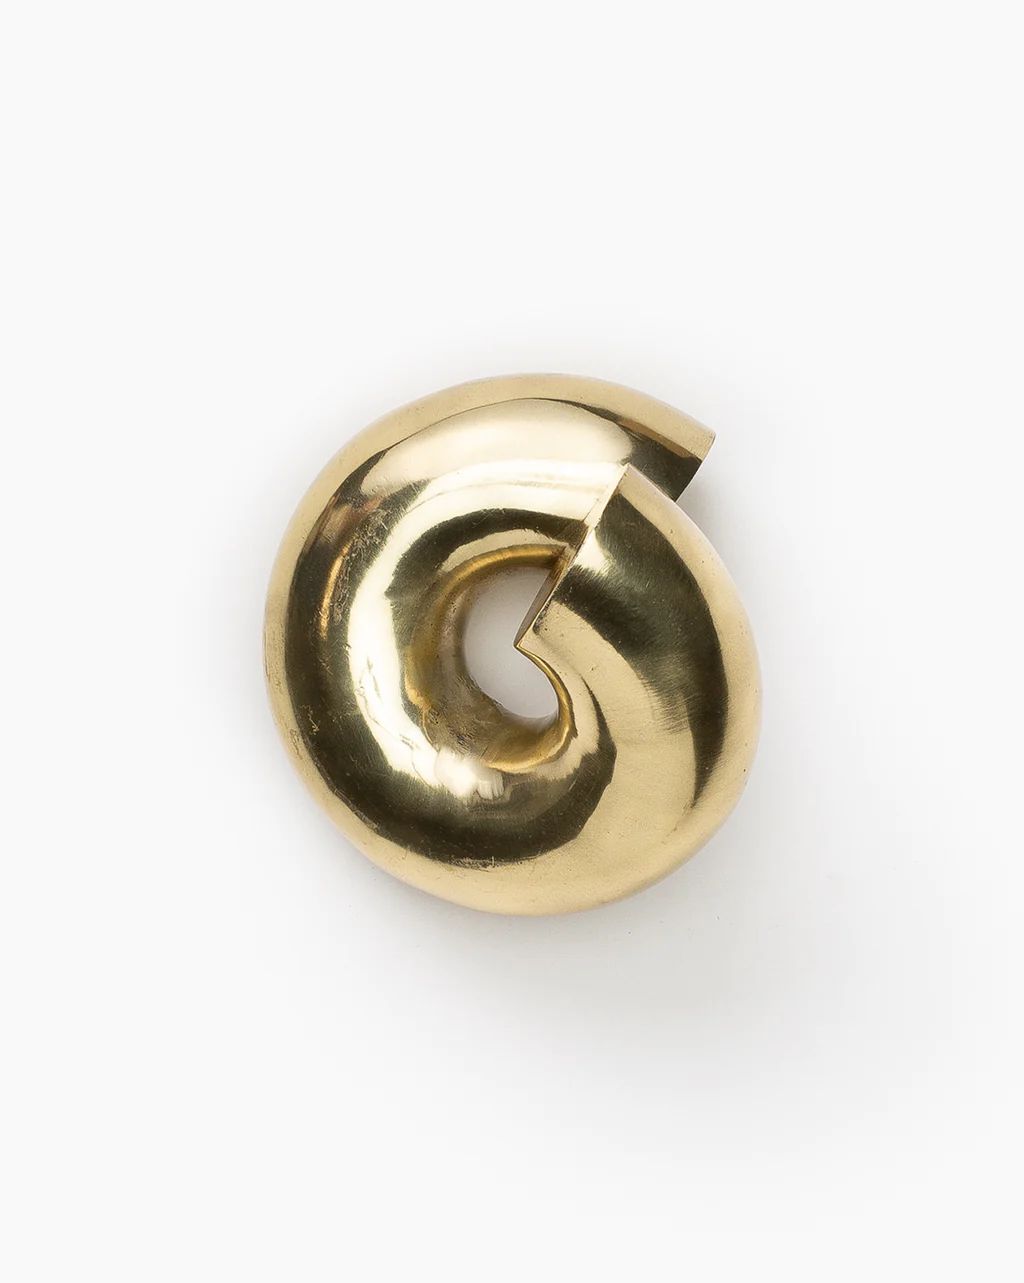 Gold Loop Object | McGee & Co.